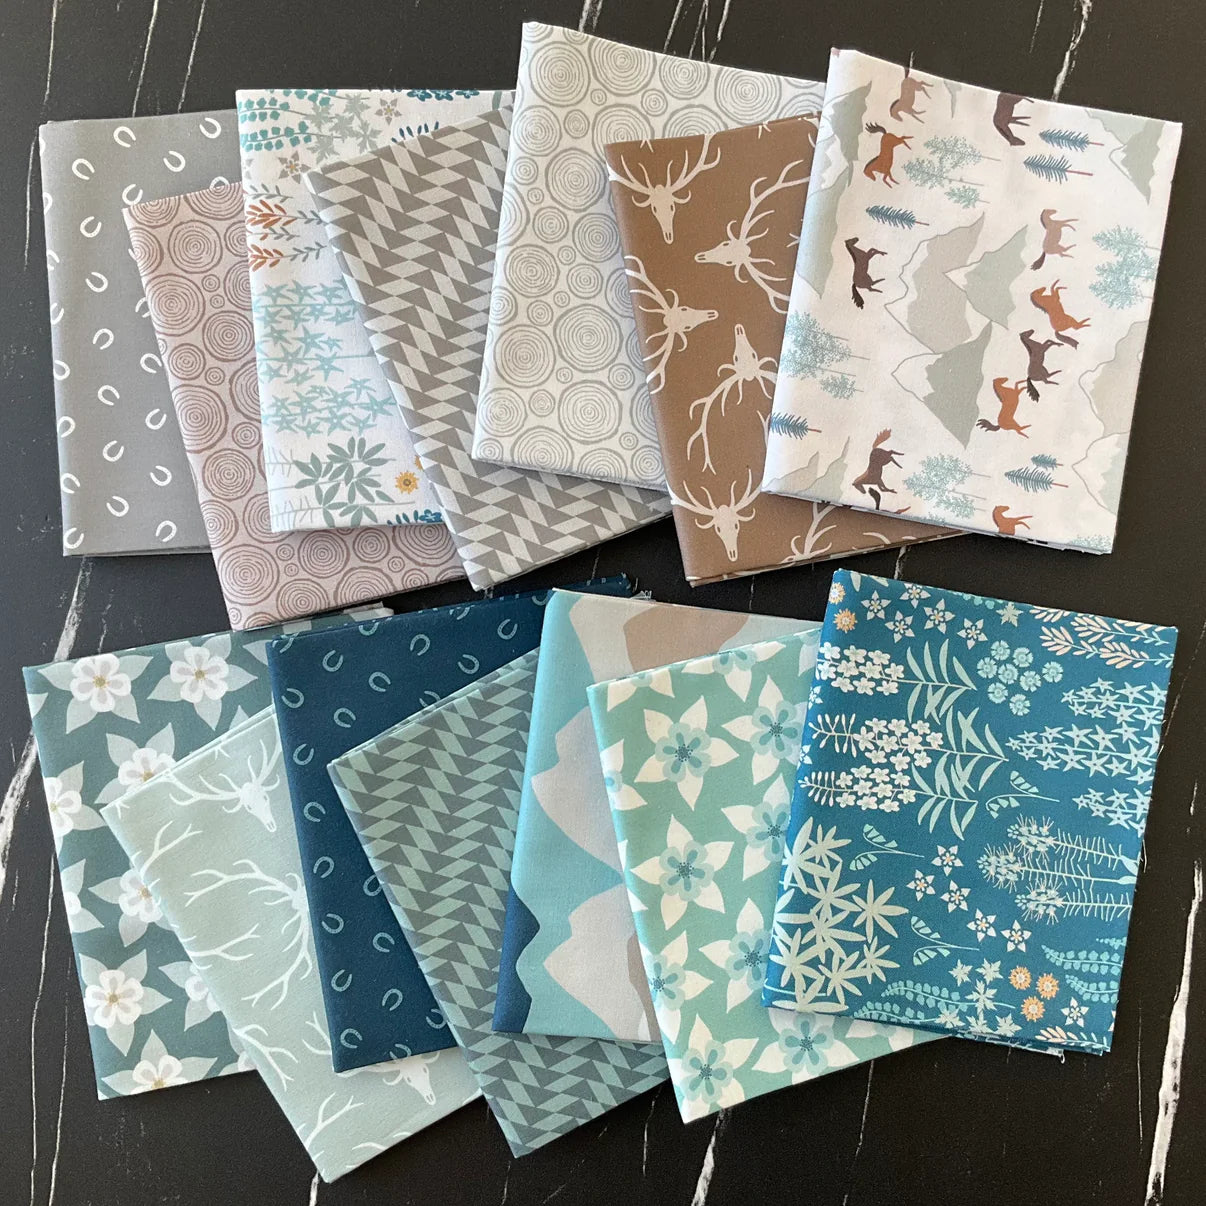 Scrapbook Quilt featuring Horizon by Pippa Shaw: Quilt Kit